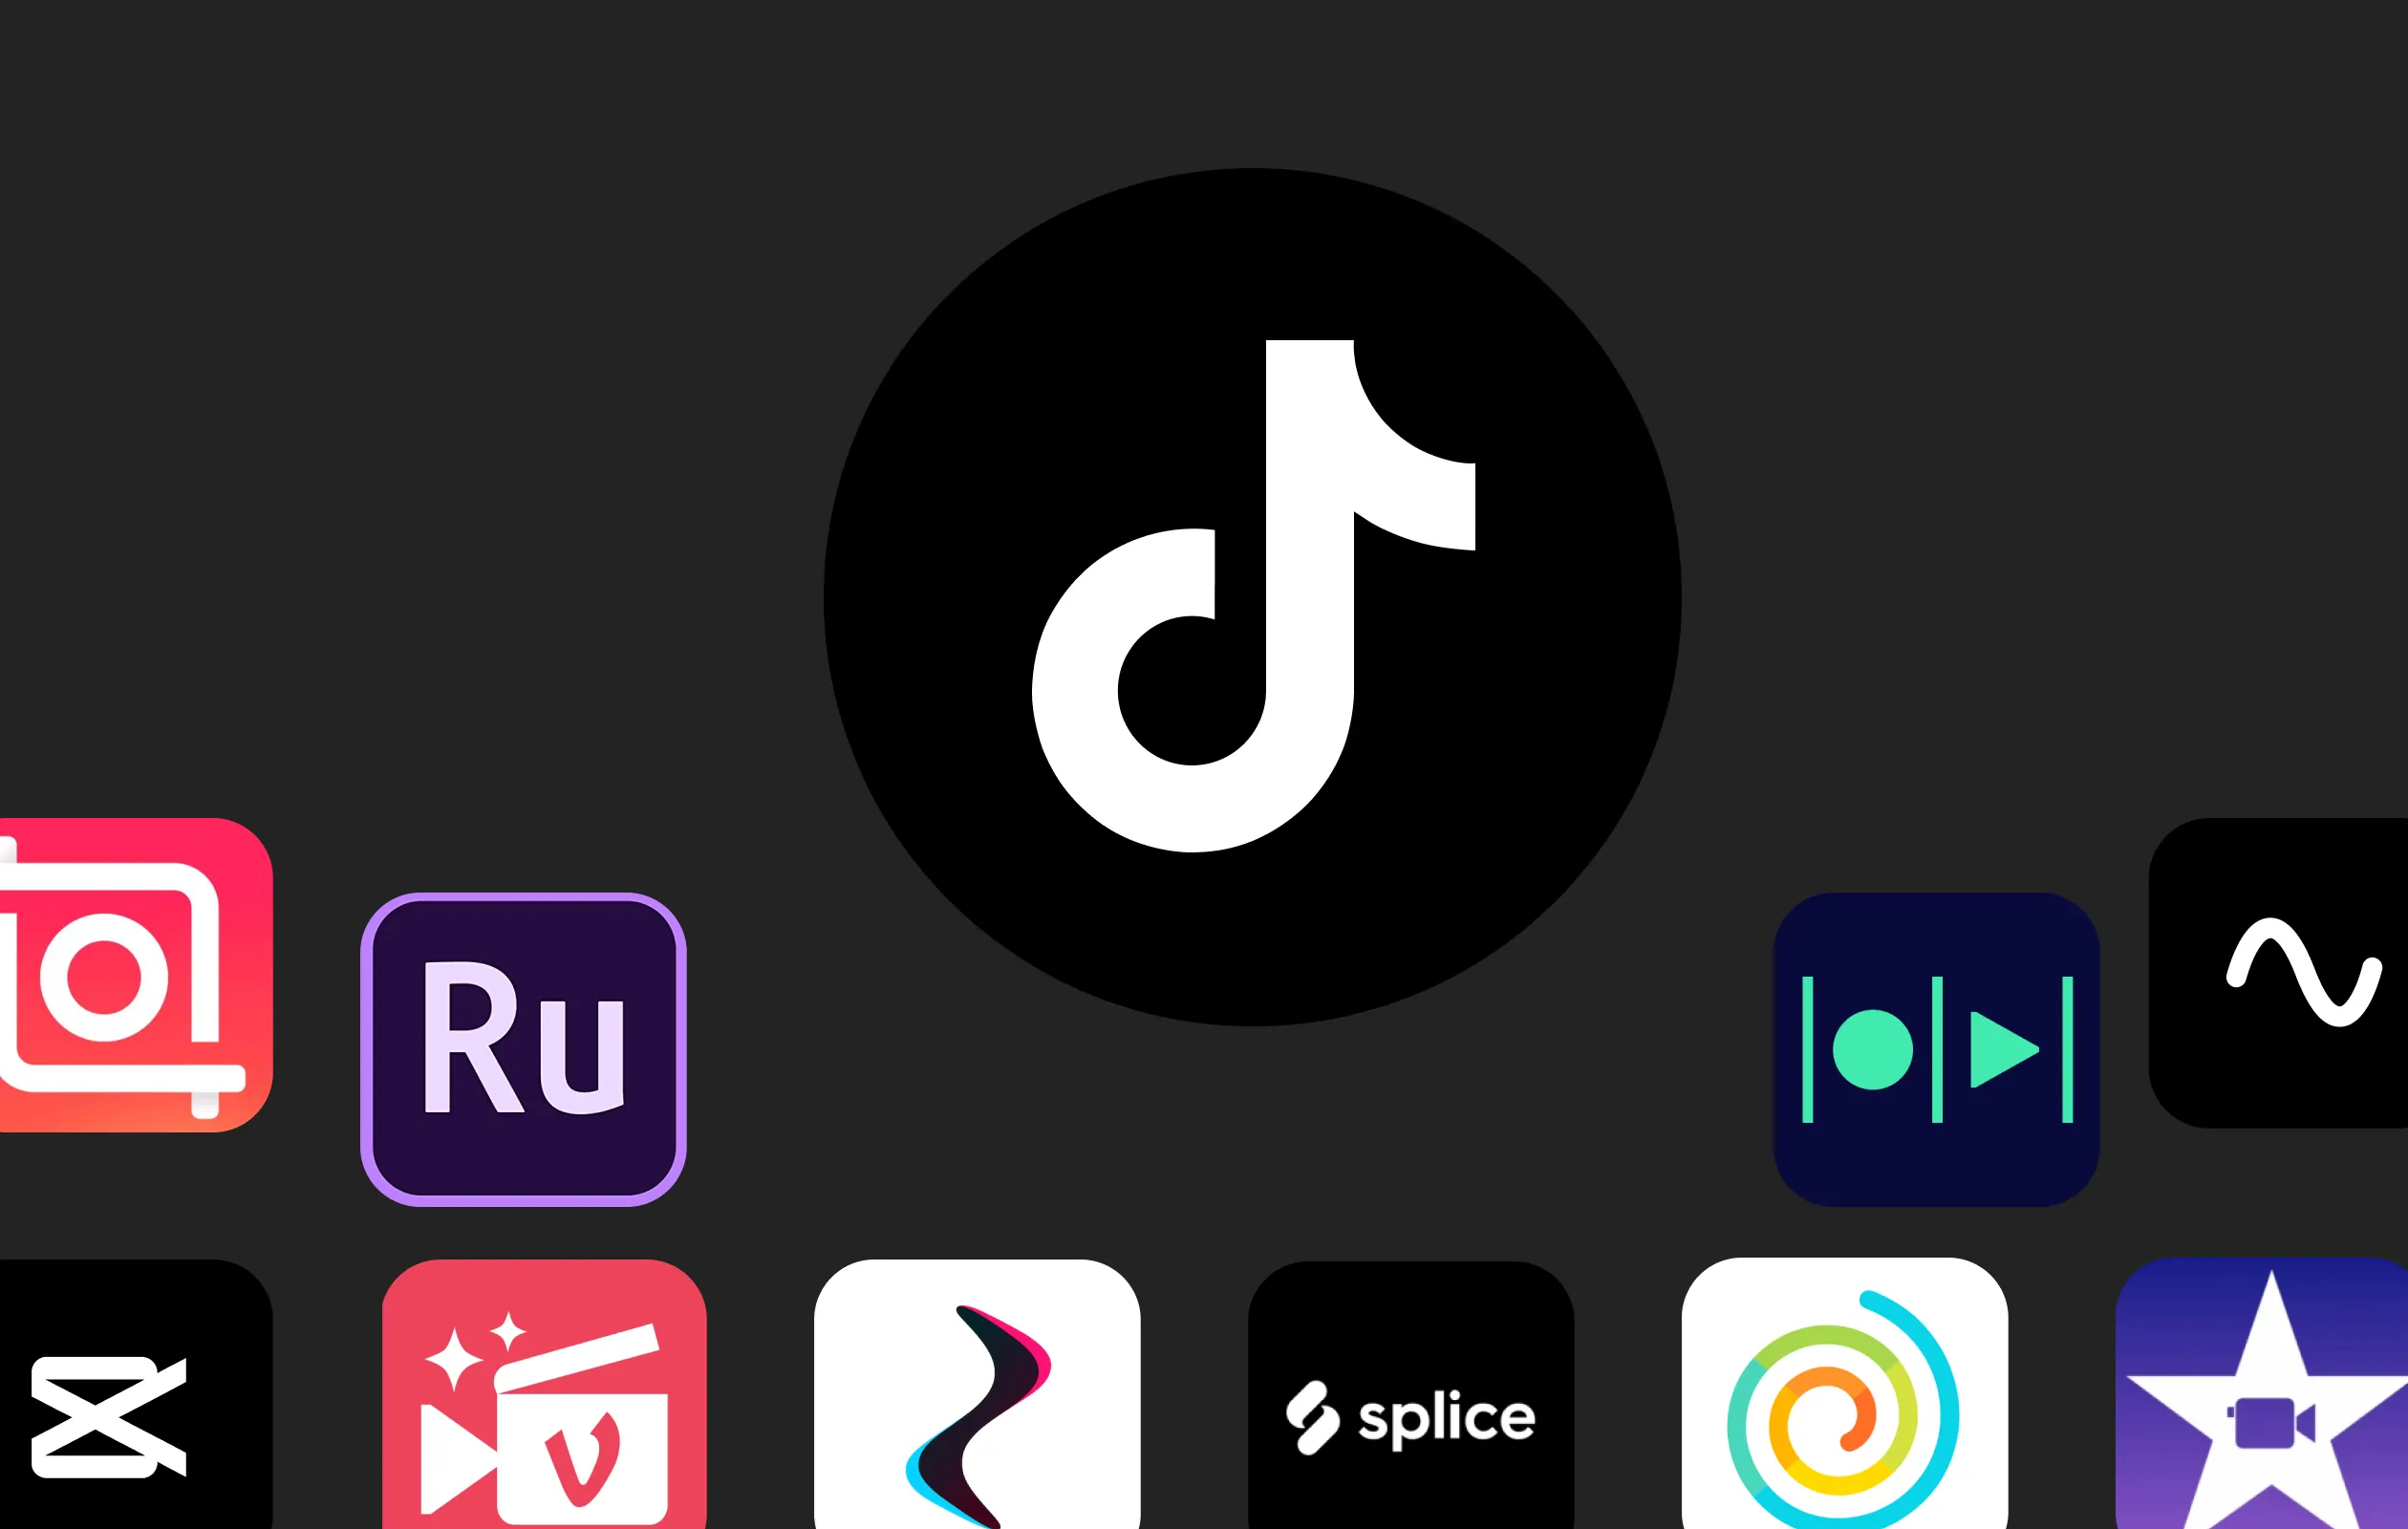 An assortment of app icons with TikTok prominently centered among them